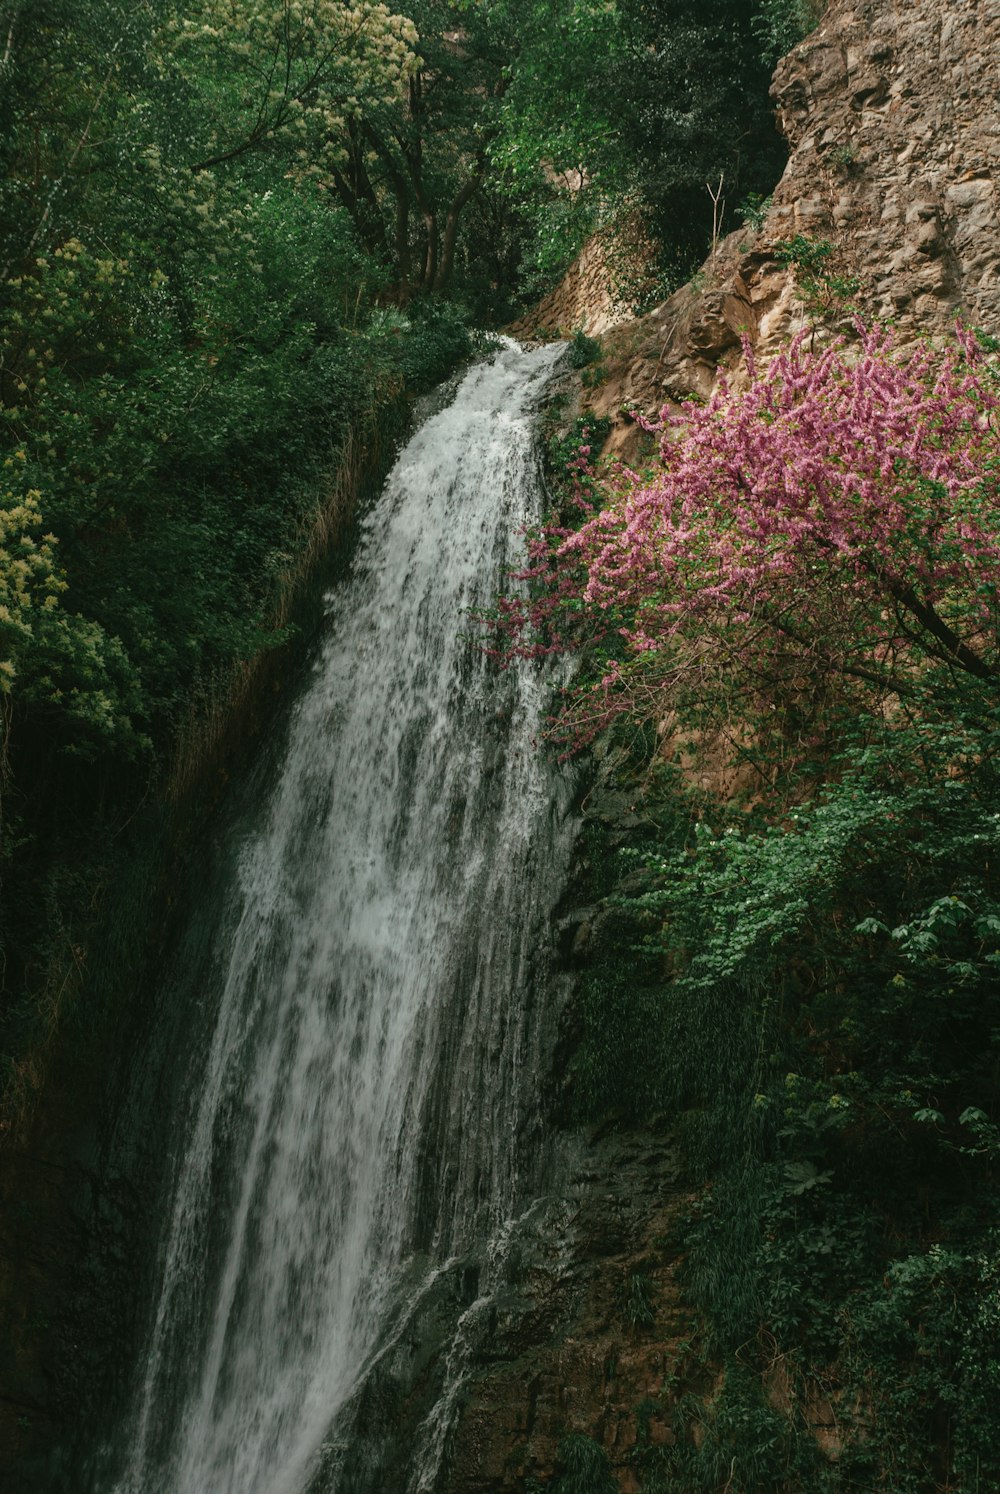 a waterfall with pink flowers in the foreground